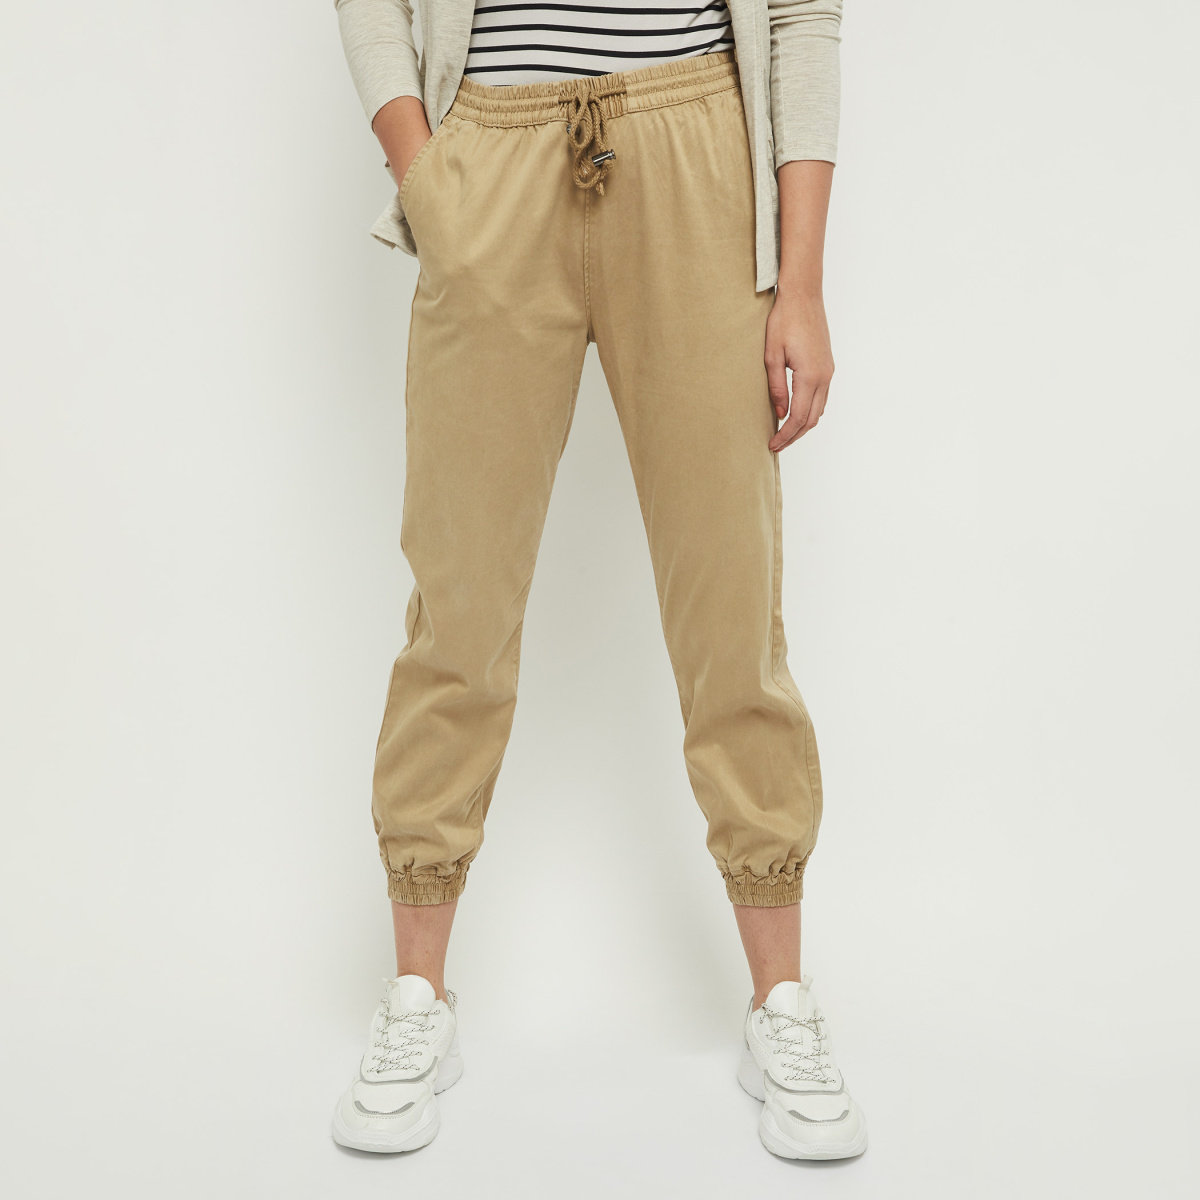 Buy Off White Trousers  Pants for Men by MAX Online  Ajiocom